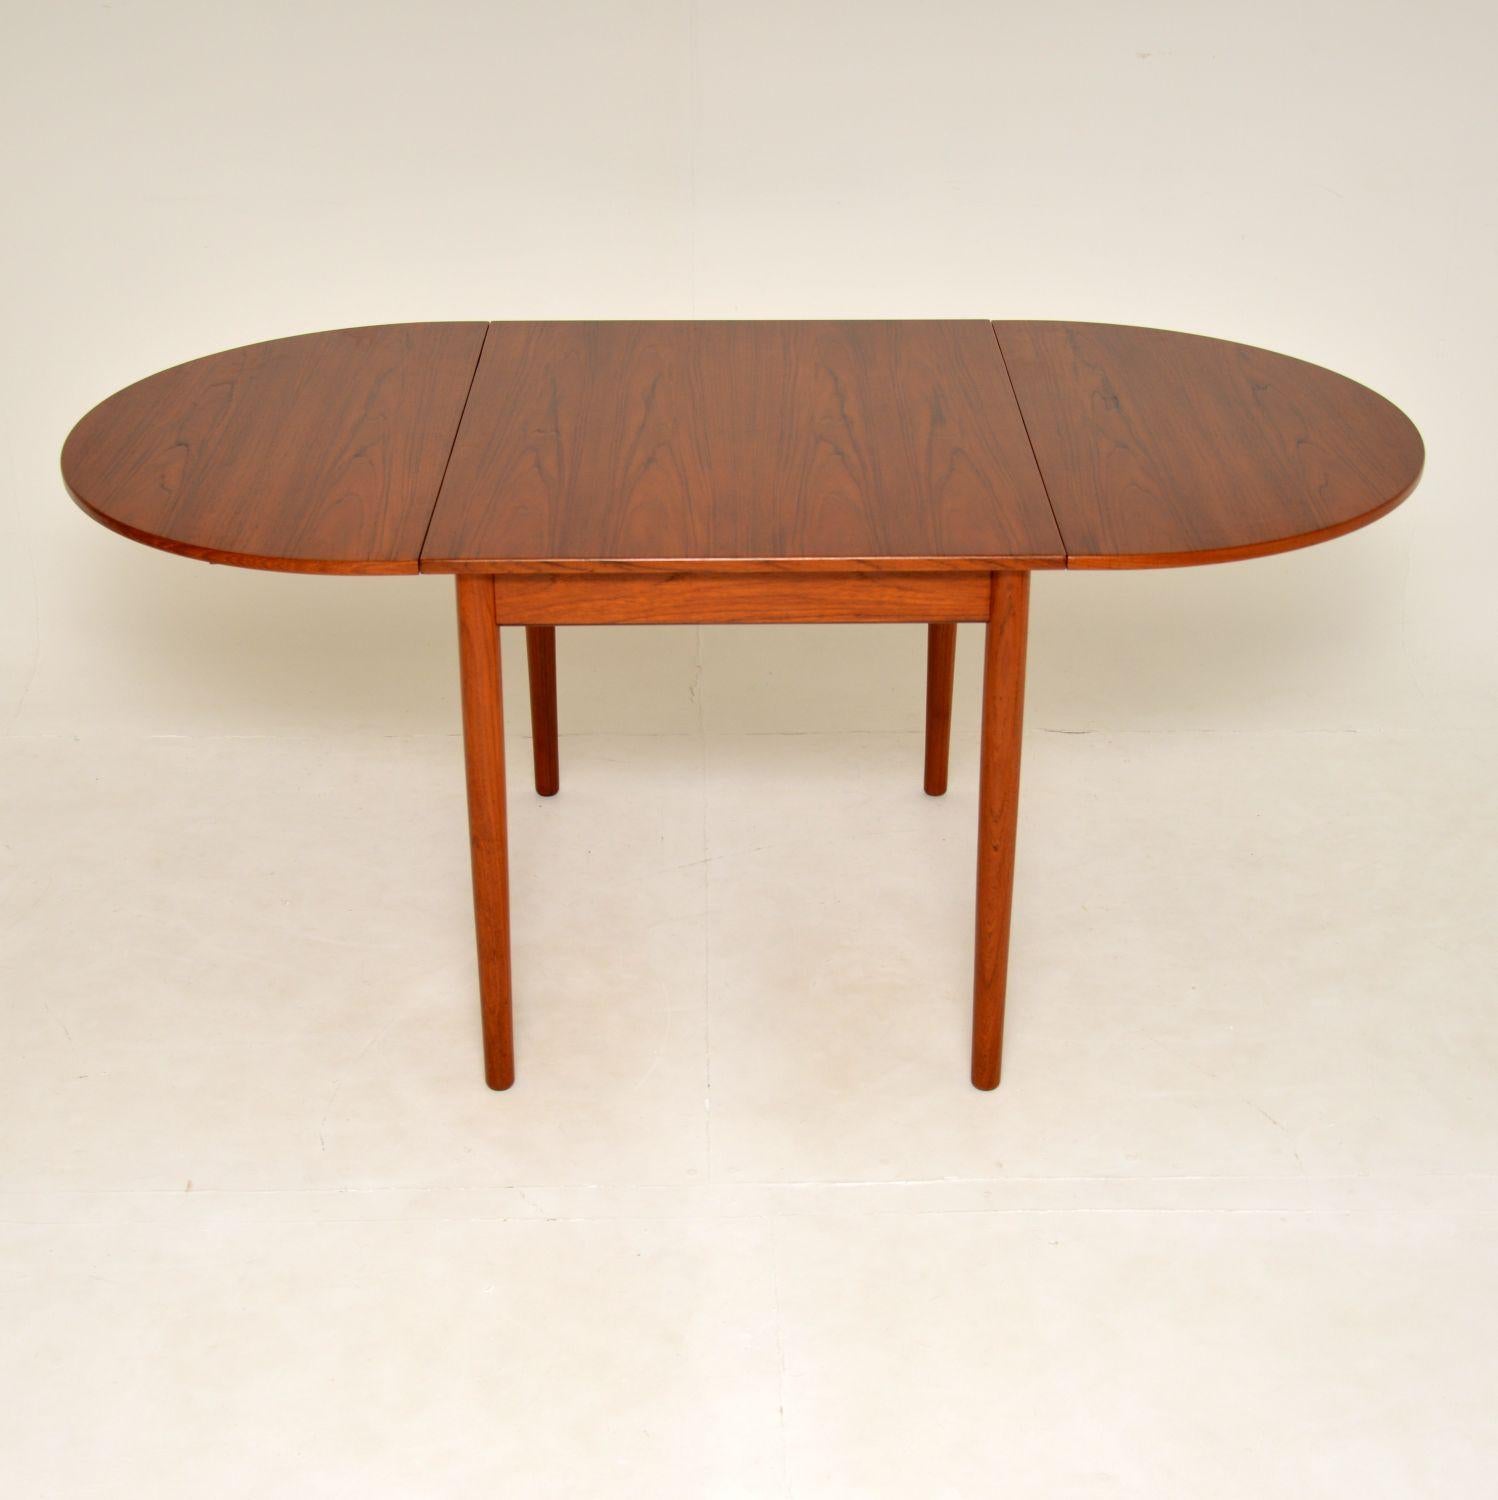 A fantastic and very rare vintage Danish drop leaf dining table in Teak. This was made in Denmark by the high end manufacturer Bernhard Pedersen & Sons, it dates from the 1960’s.

The quality is amazing with superb joinery on display, and this is a